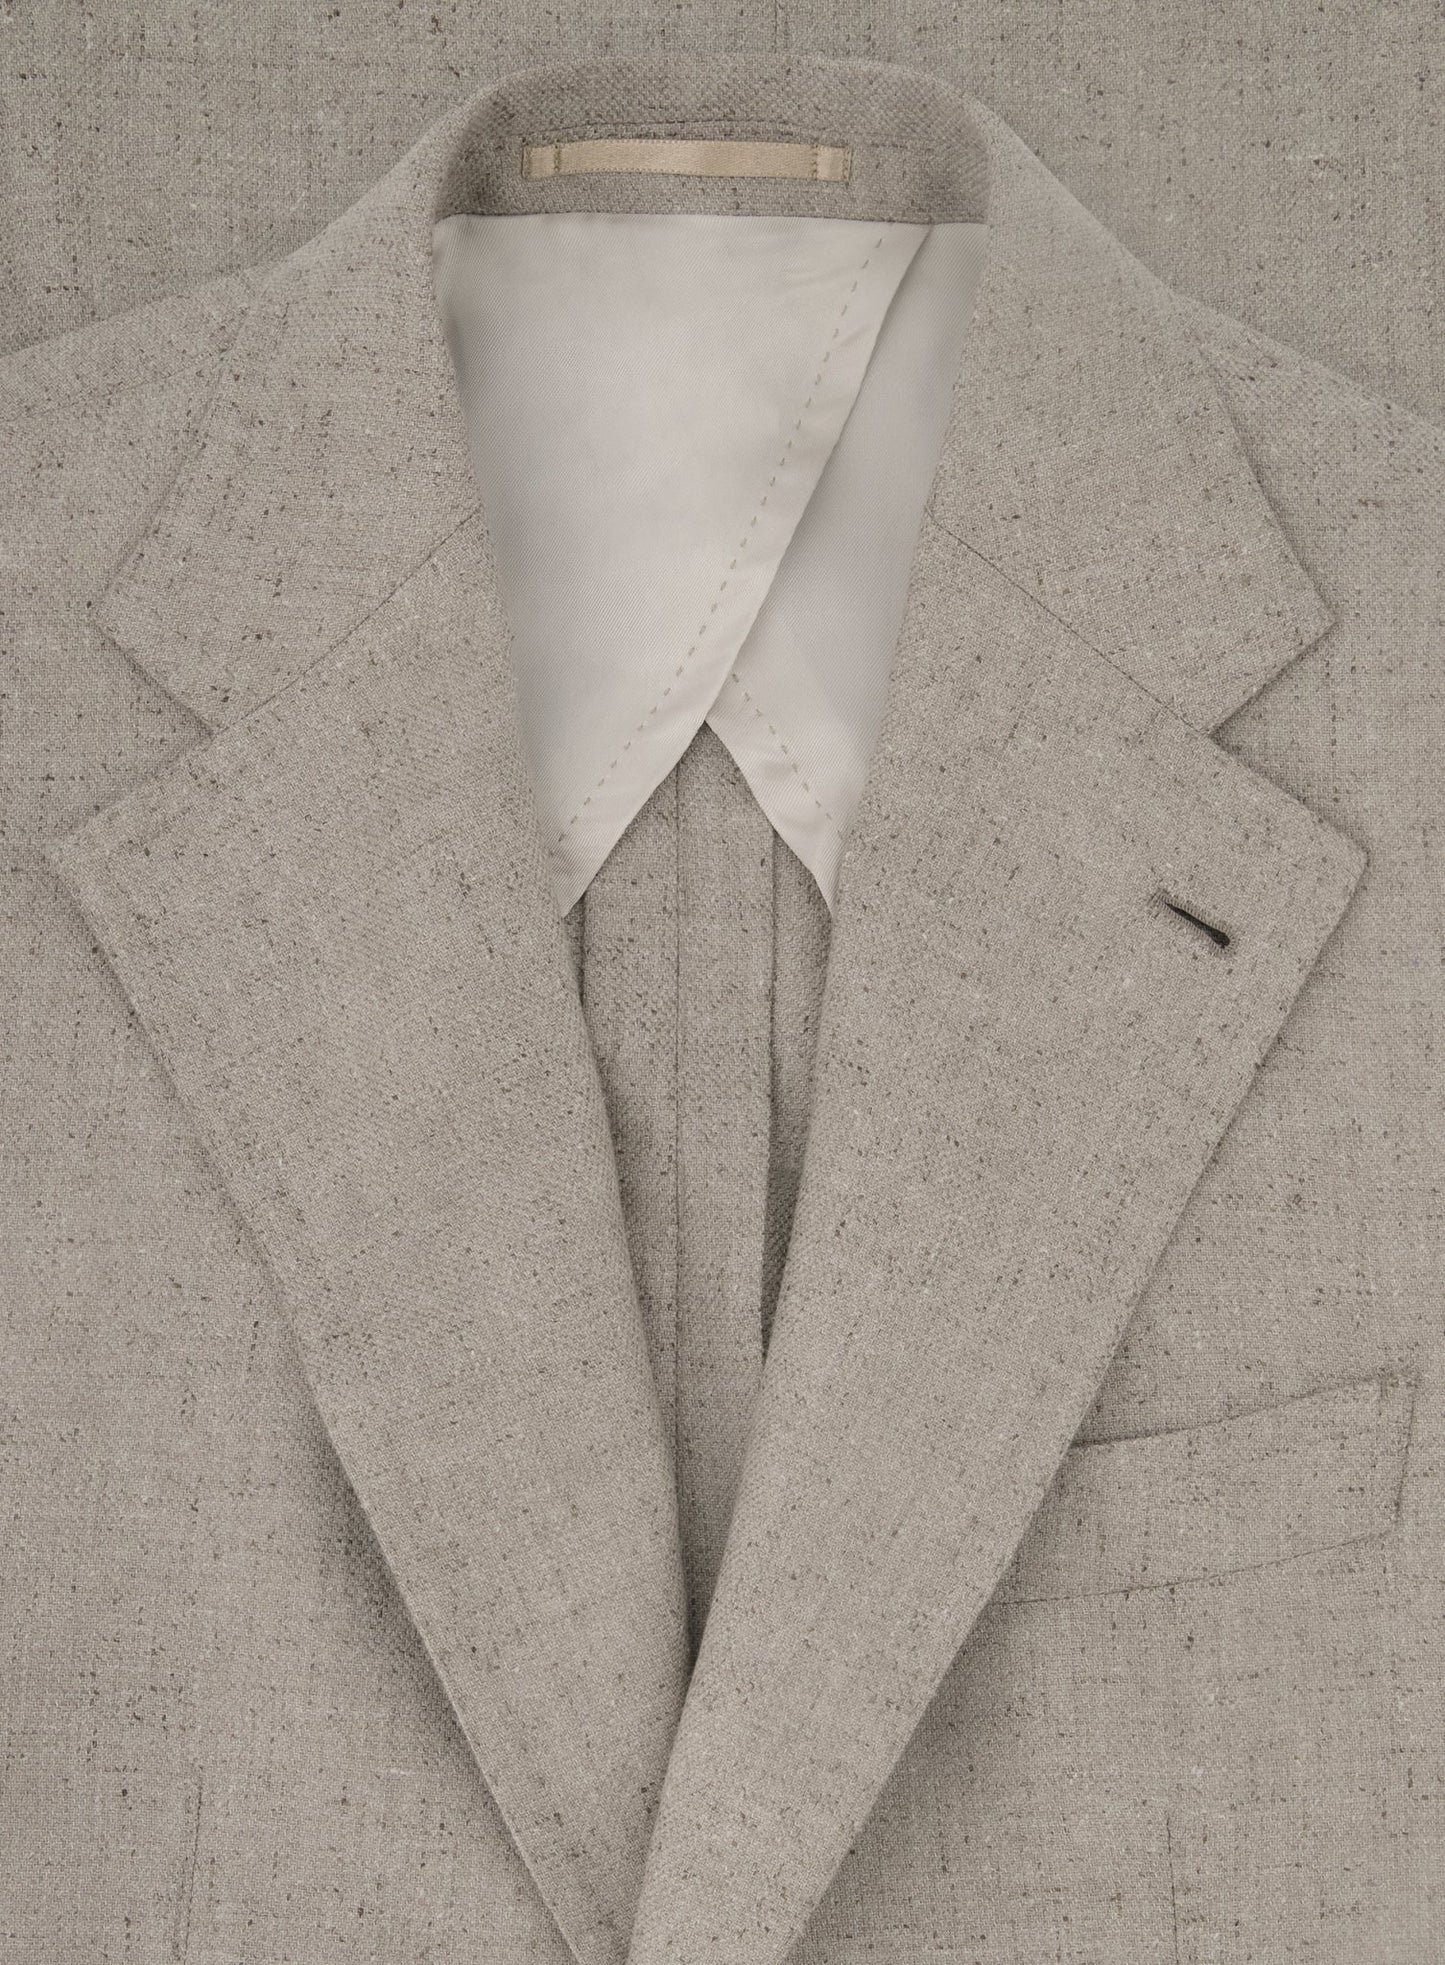 Jacket made of silk and wool